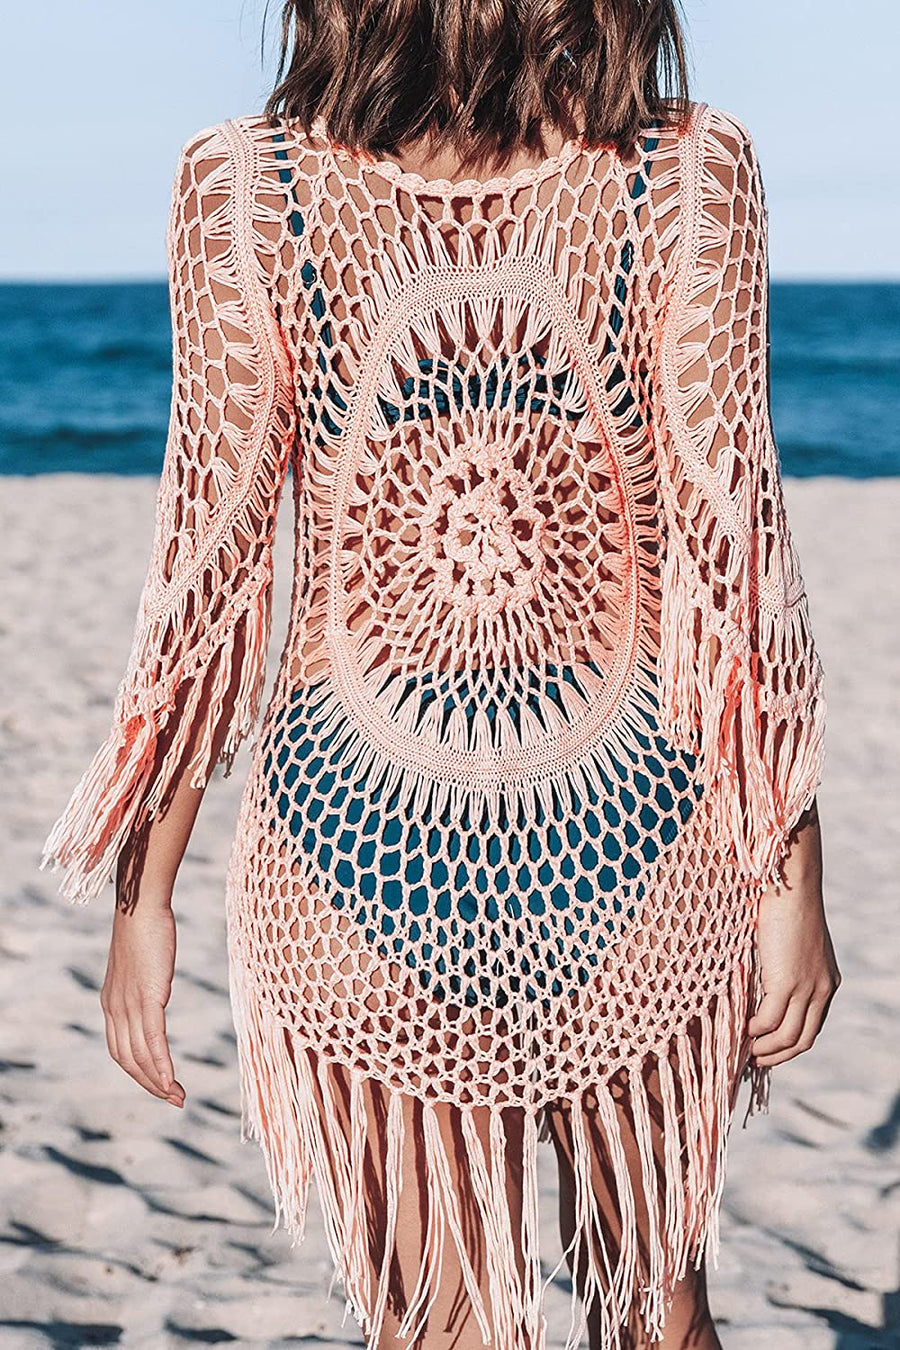 Crochet Hollow Out Tassel Swimsuit Cover Up